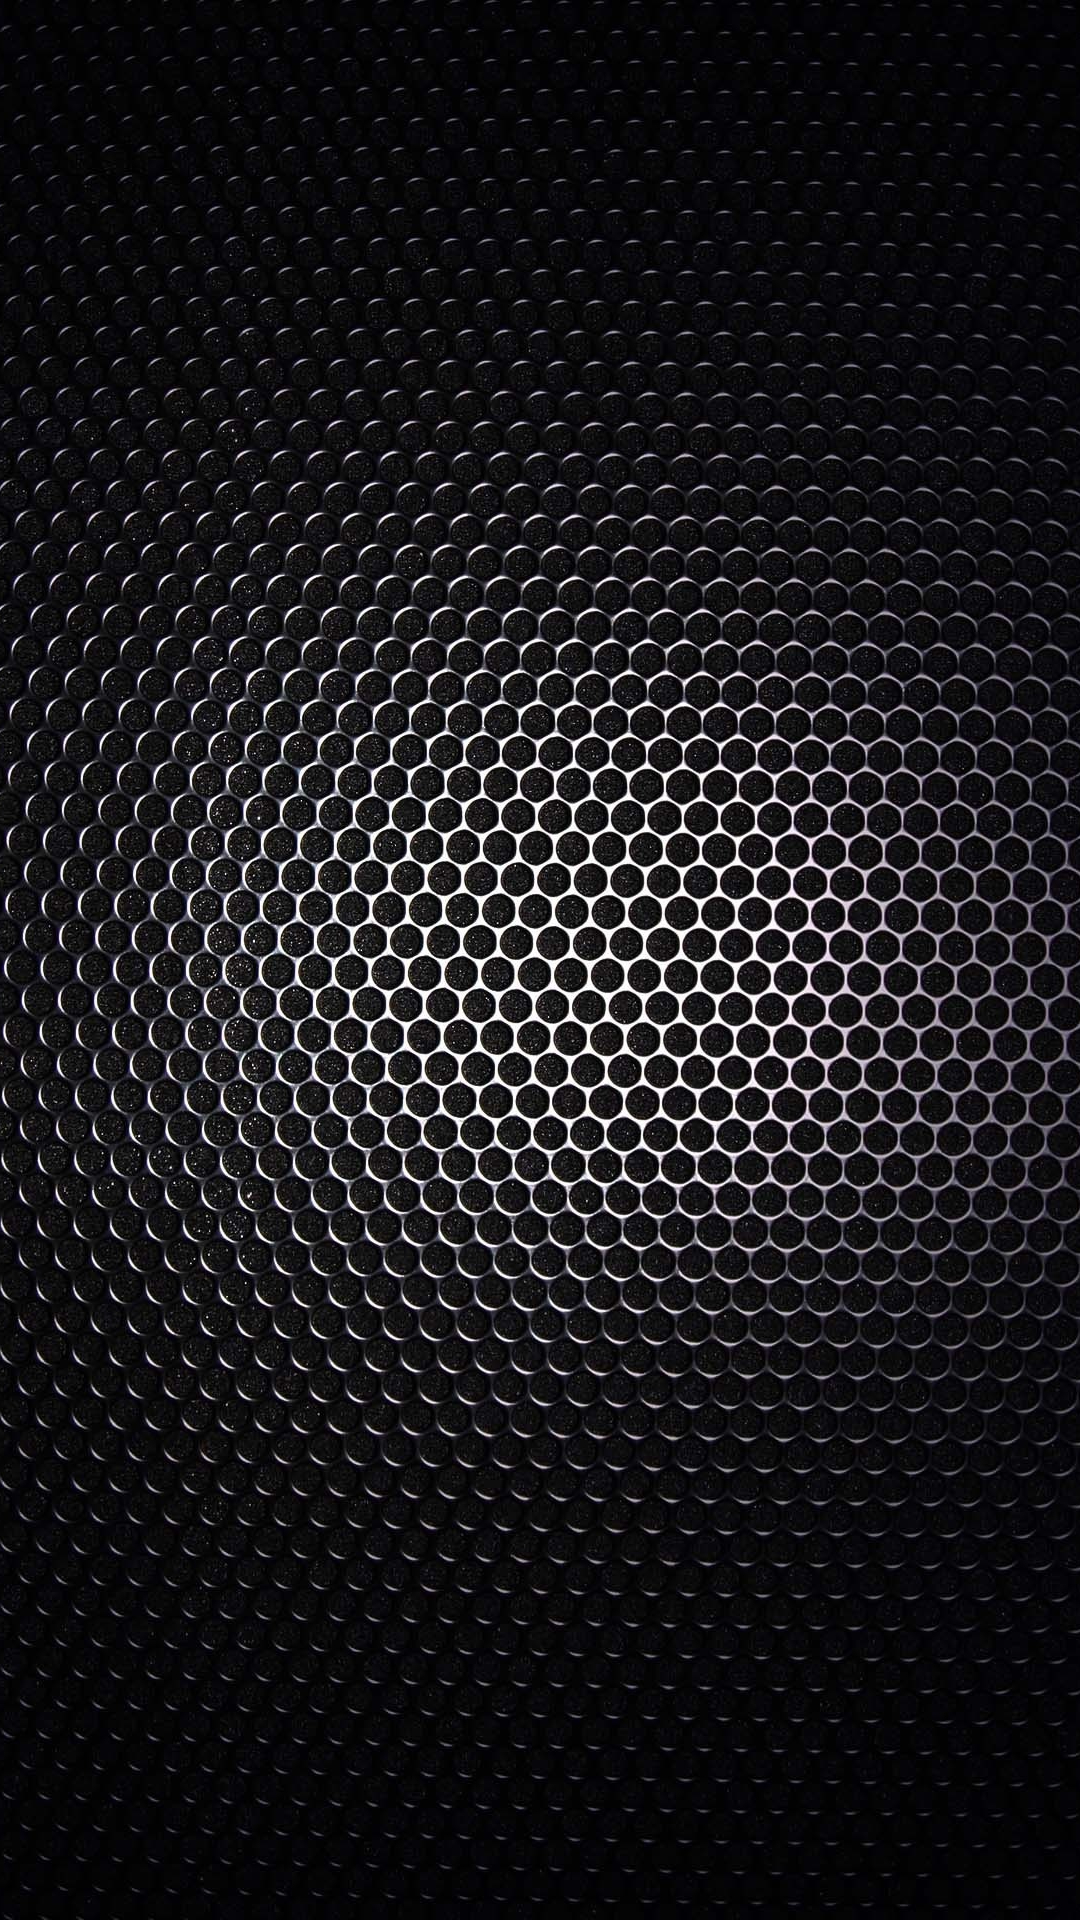 Galaxy S4 Wallpaper With Black Metal Grid Design In